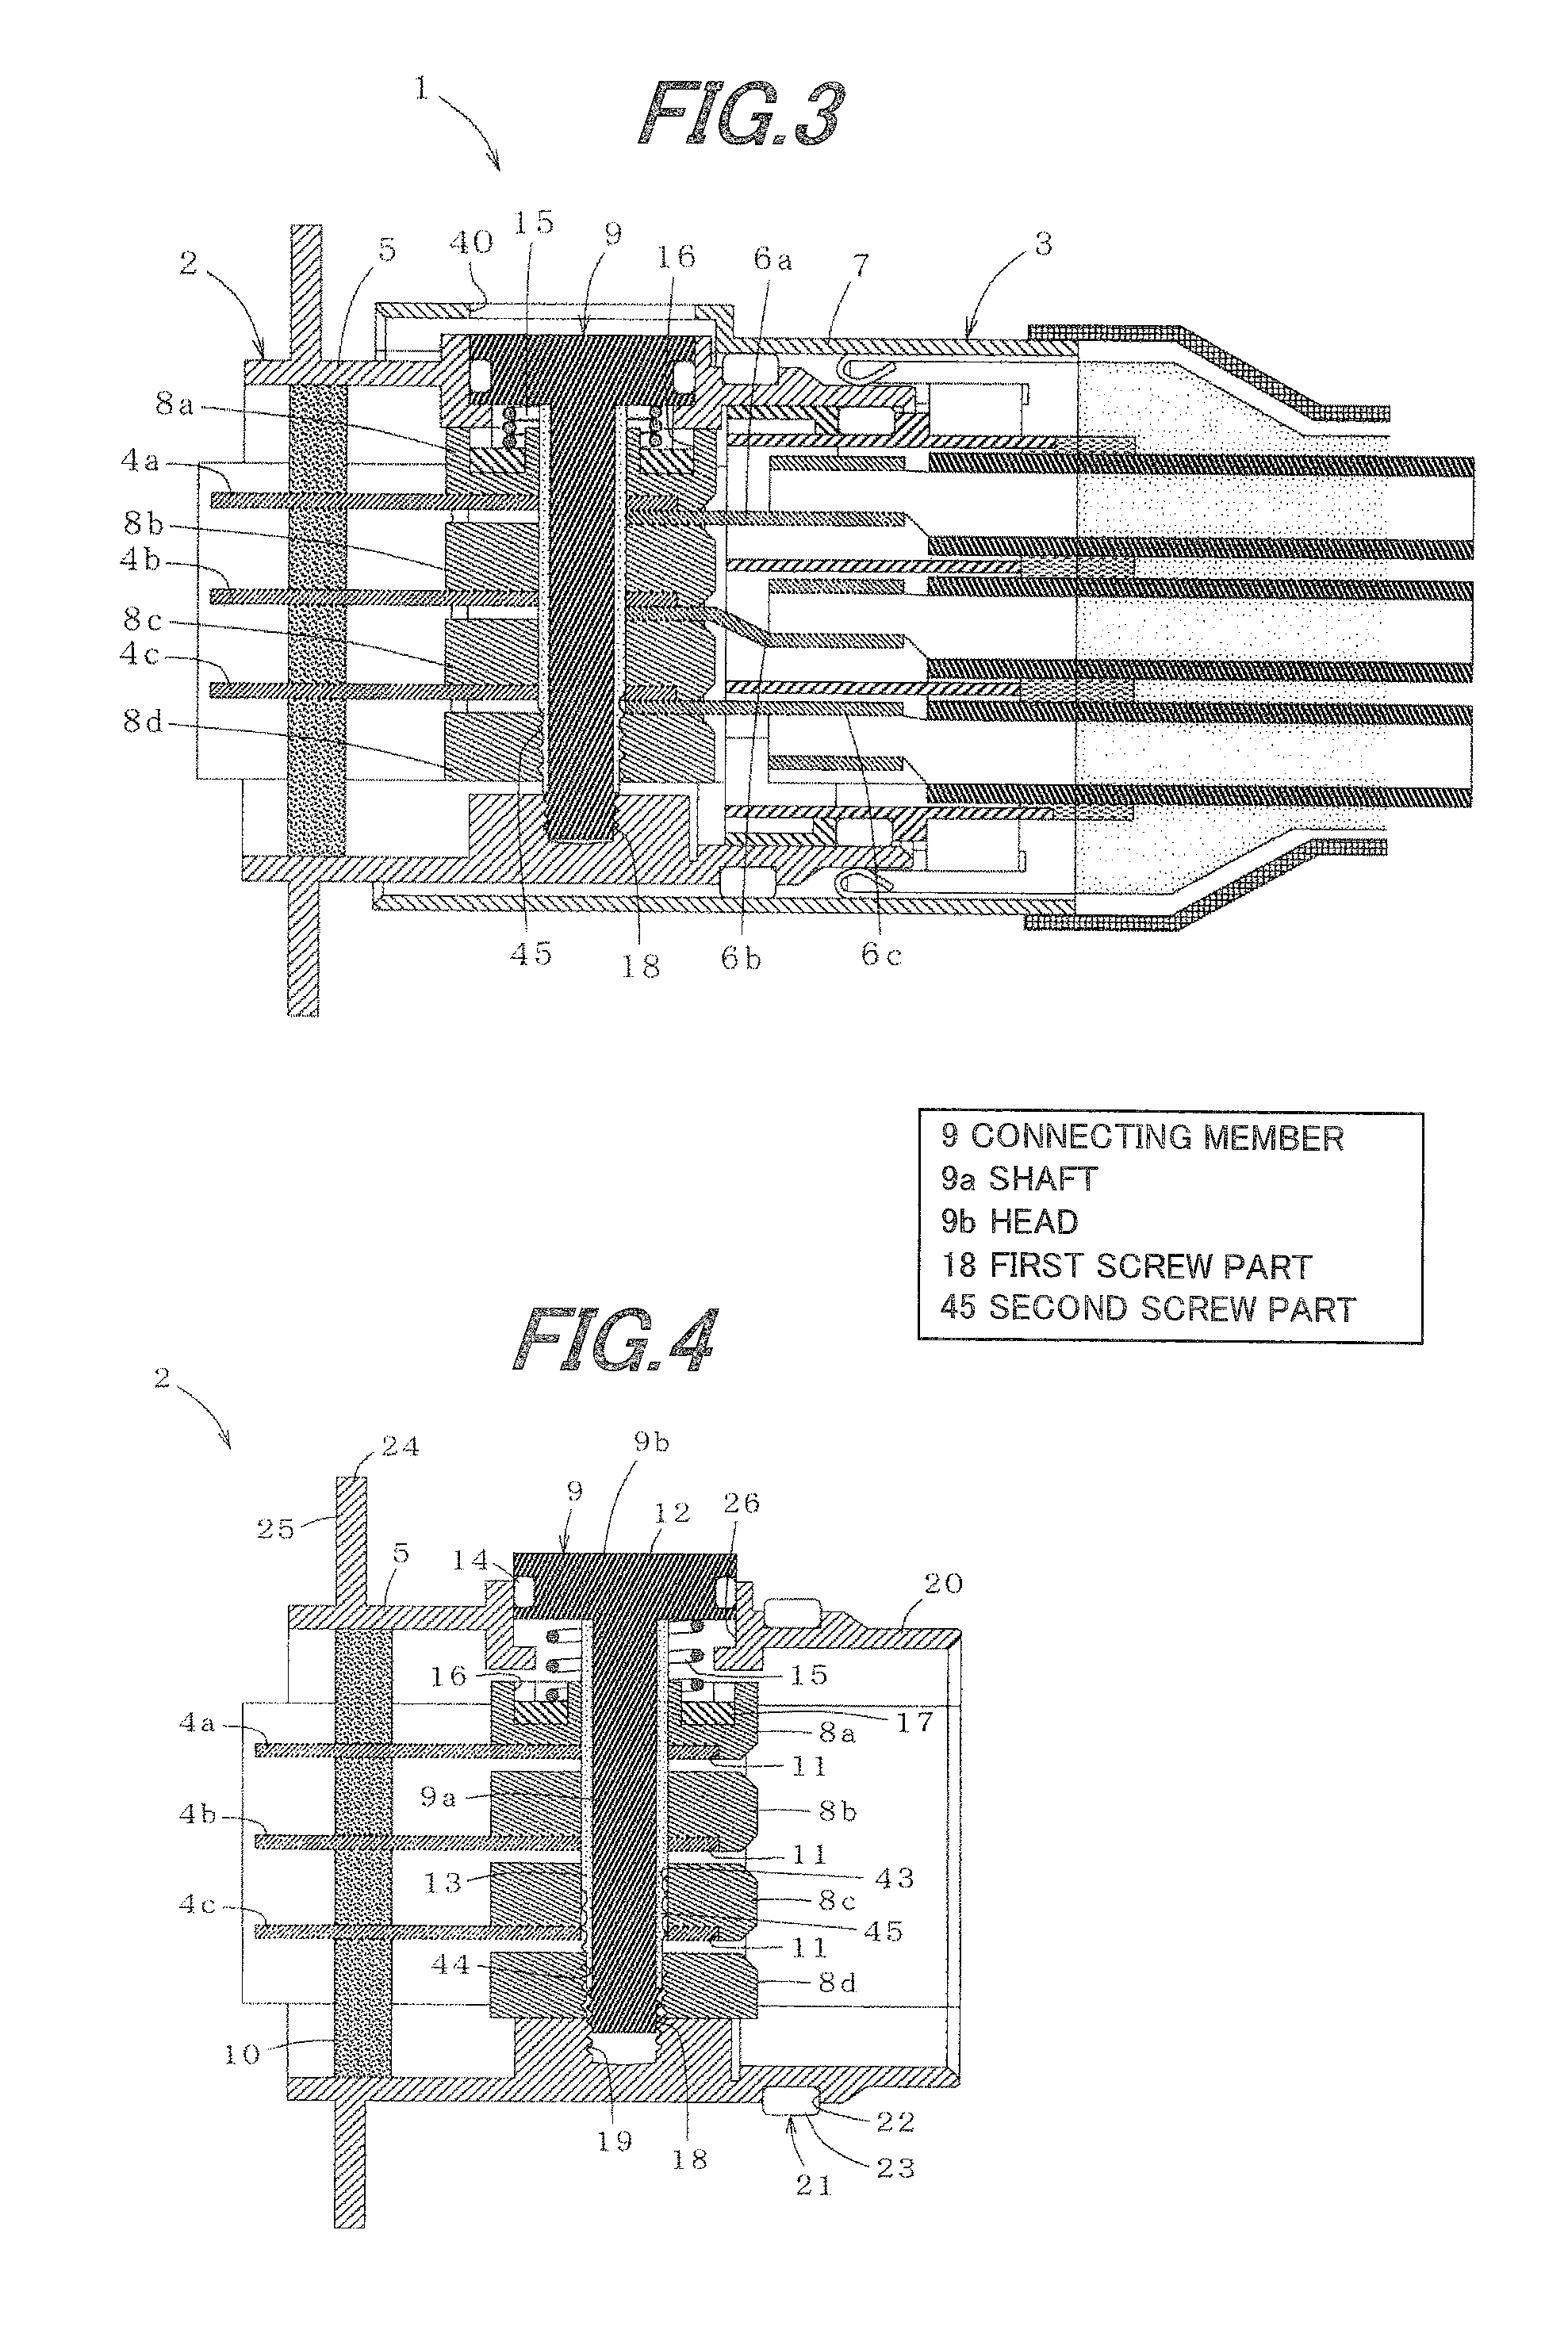 Connector with a connecting member with a screw portion penetrating the insulators and terminals of two mating terminal housings